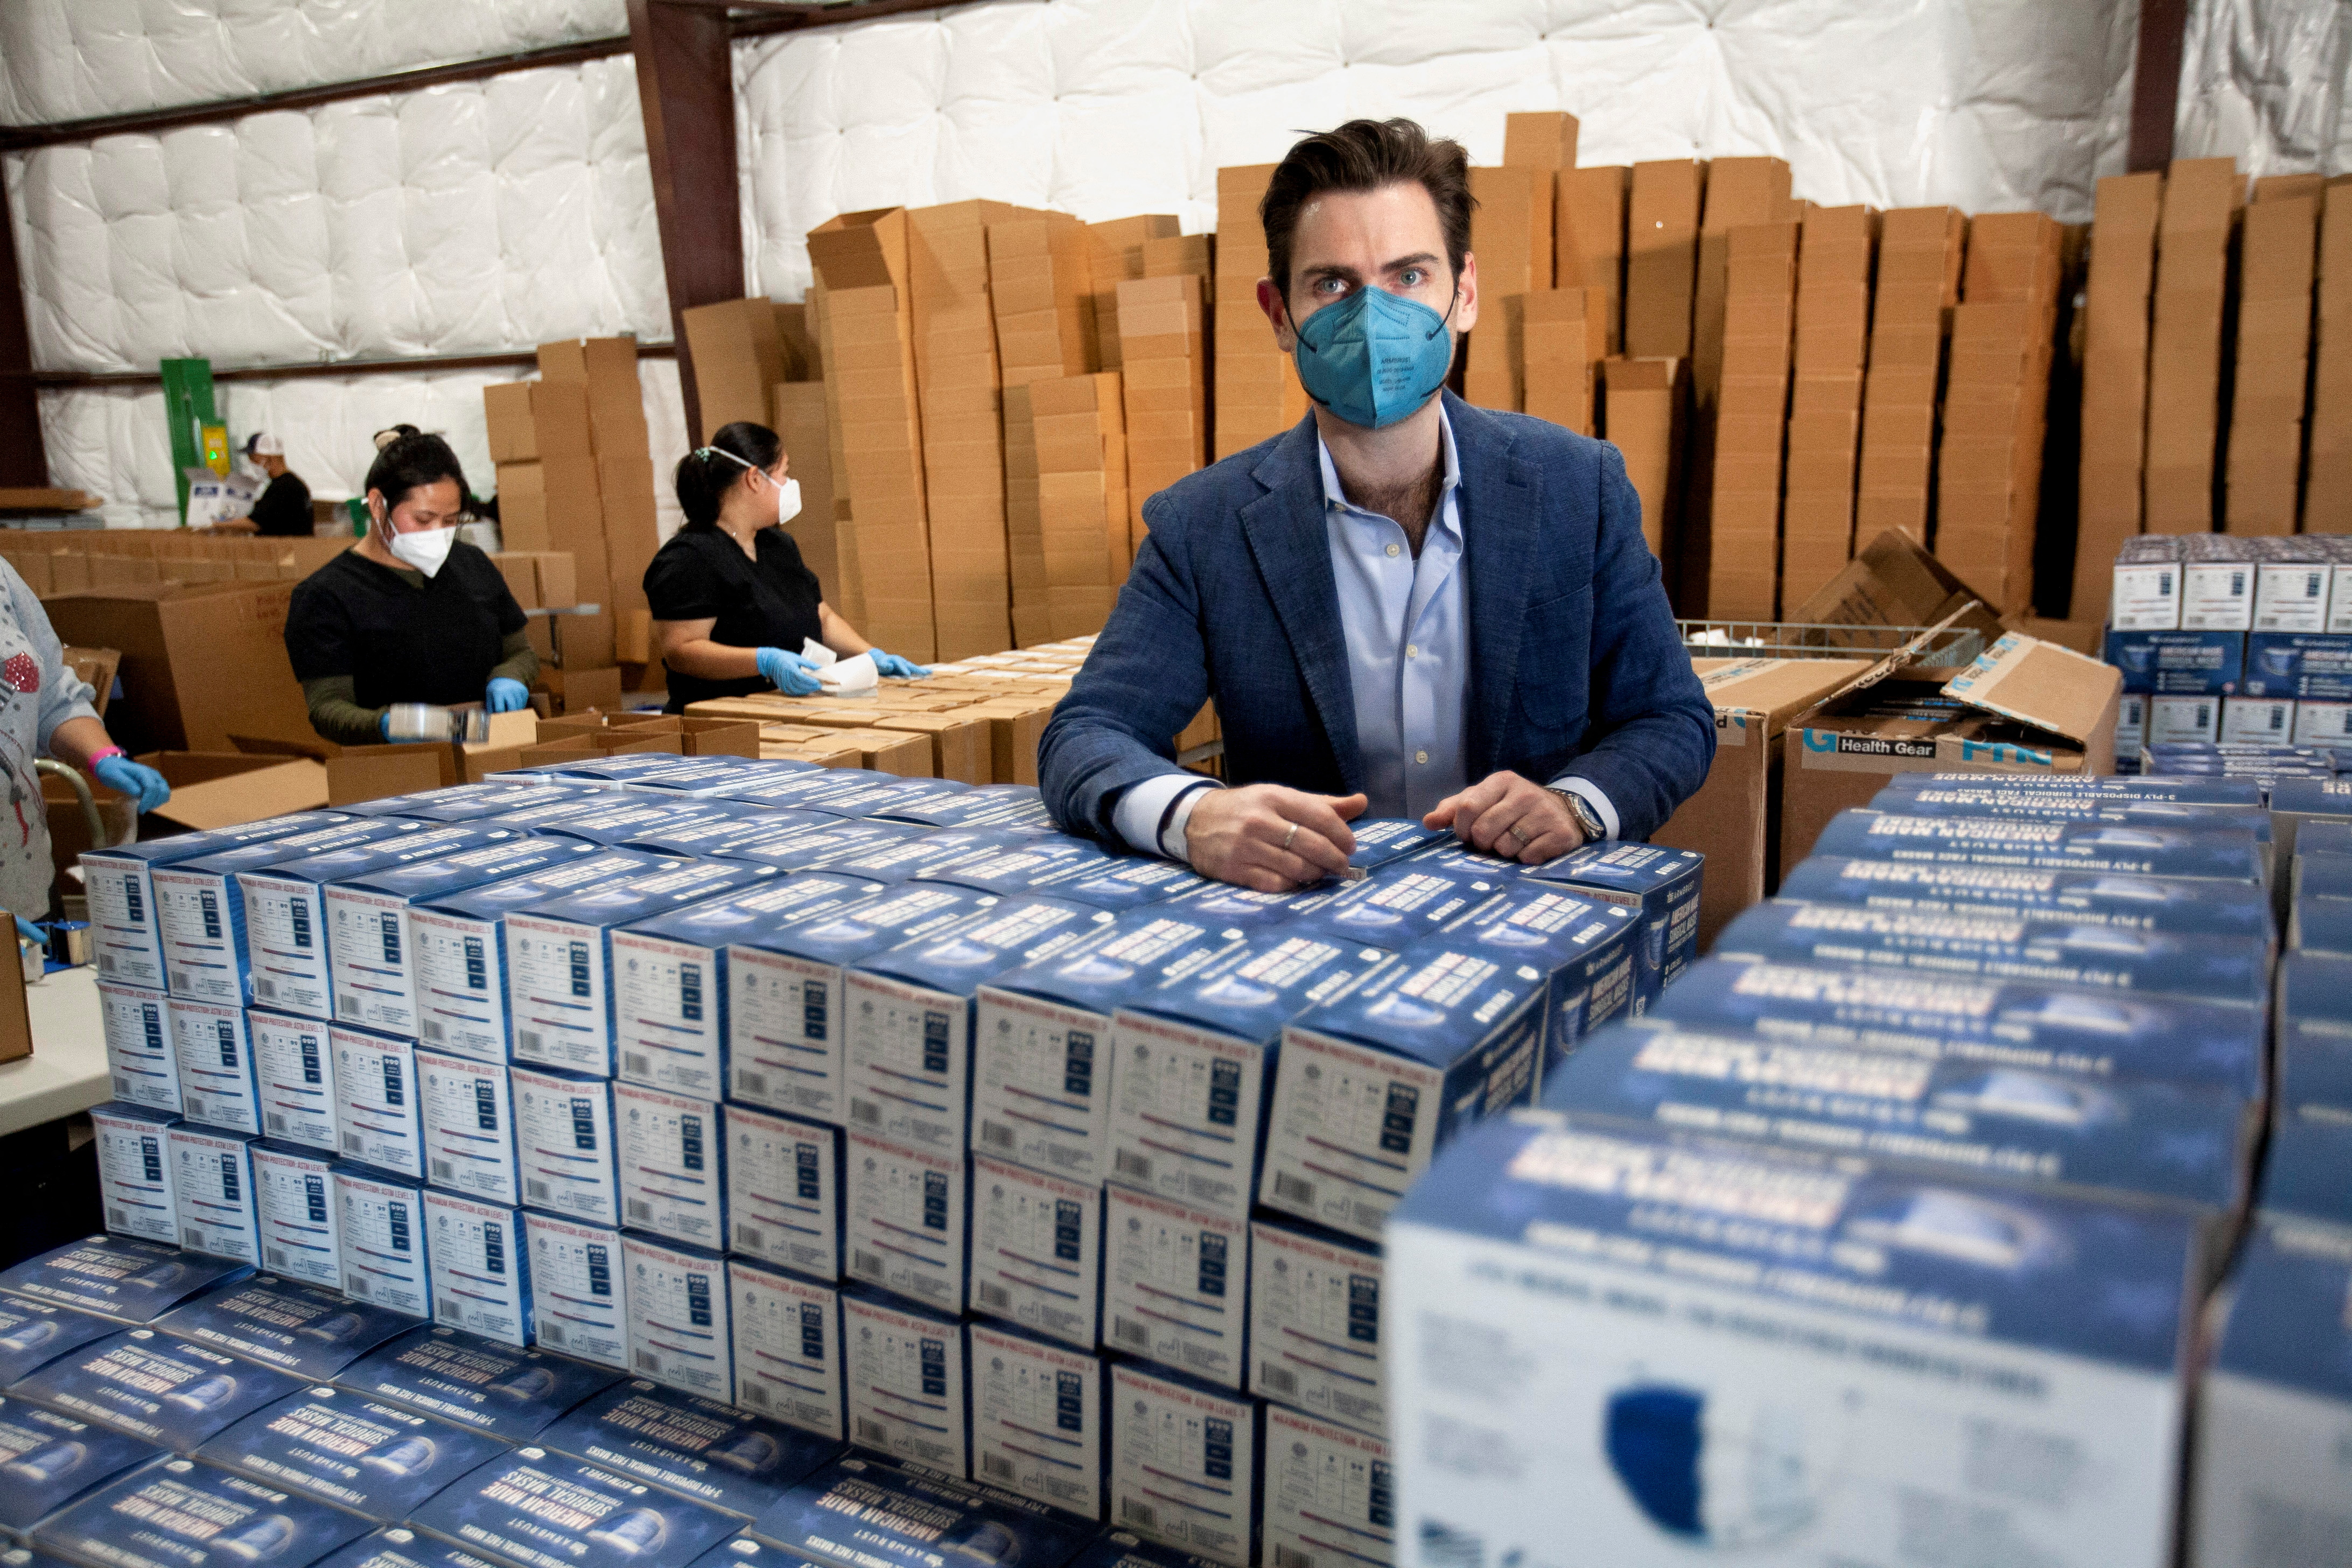 Armbrust American founder and Chief Executive Officer Lloyd Armbrust displays some of his masks at his company's warehouse in Pflugerville, Texas, U.S., January 12, 2022.  He said he is shipping an average of 250,000 masks per day now. REUTERS/Nuri Vallbona